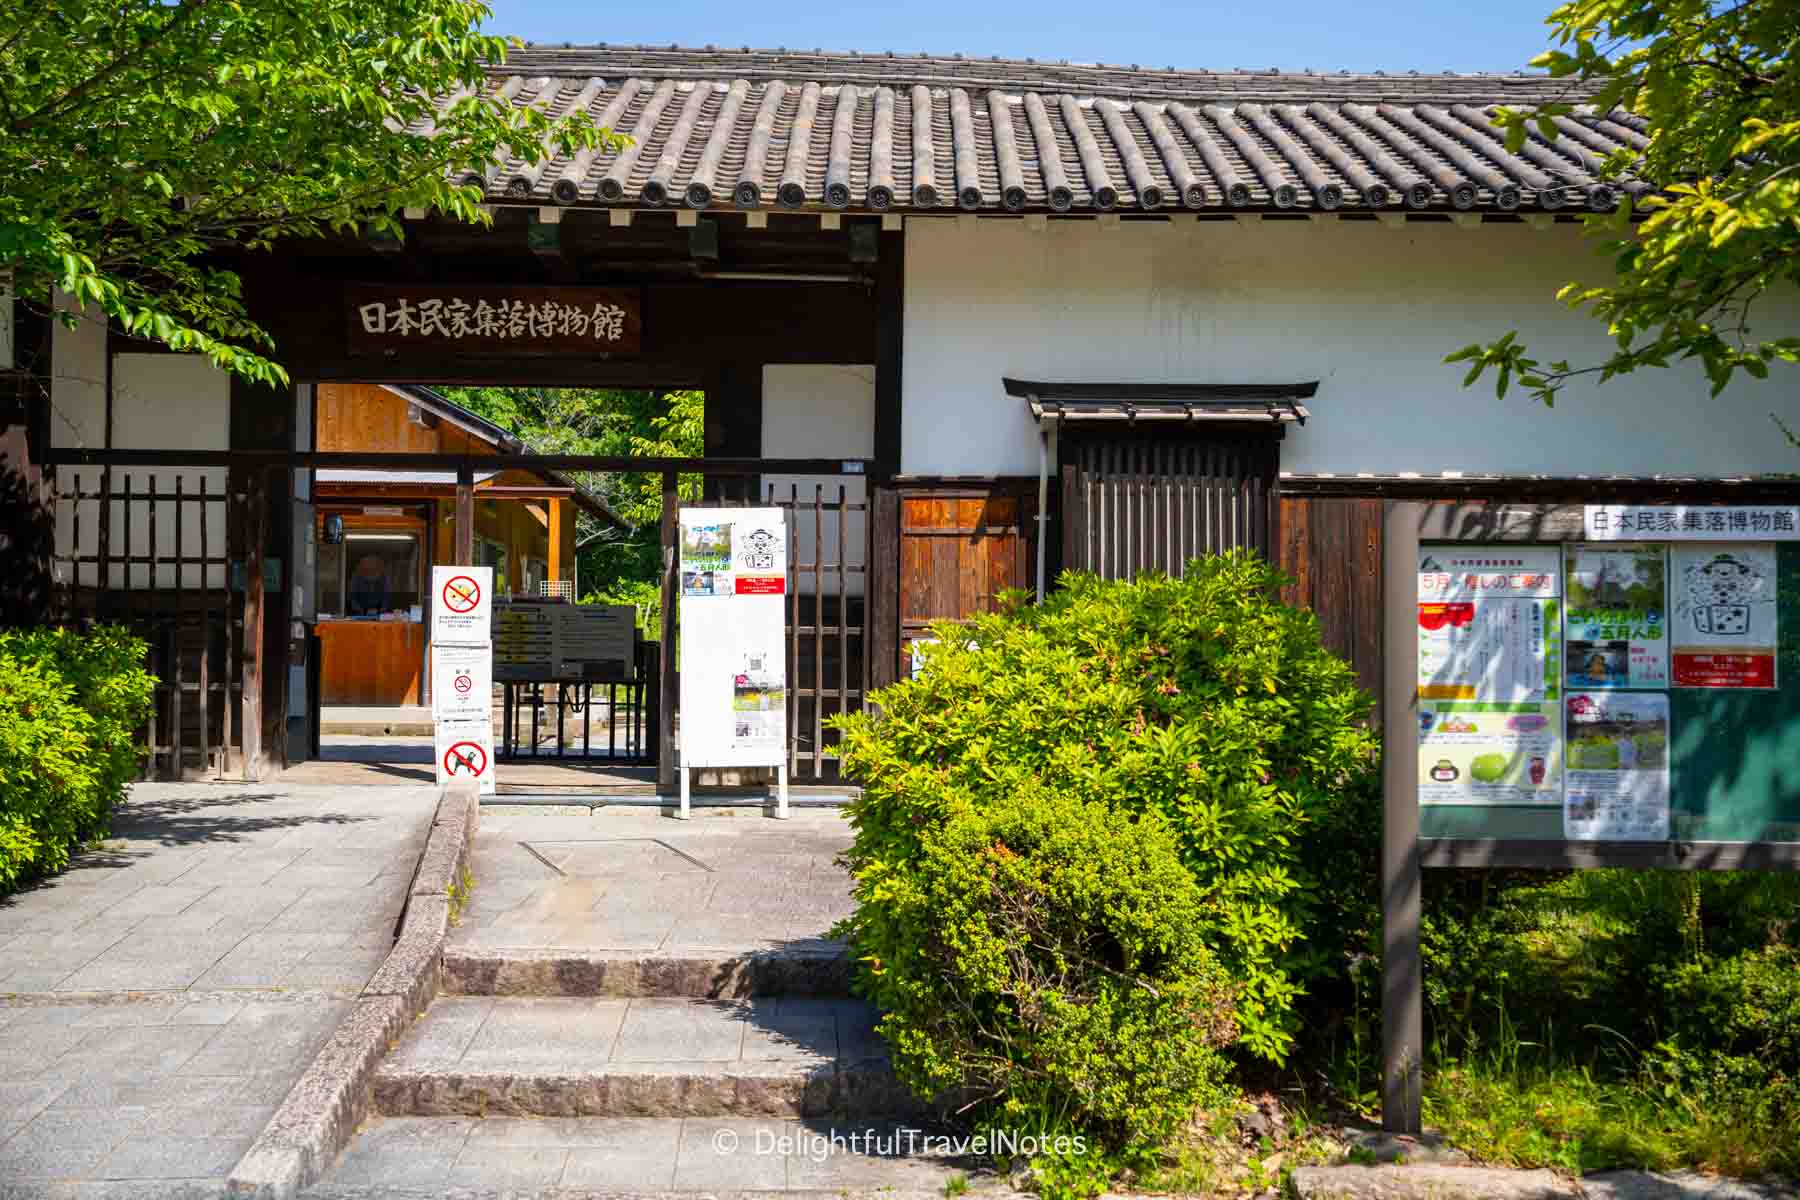 the entrance gate of Open Air Museum of Old Japanese Farmhouses, a must see in Osaka.